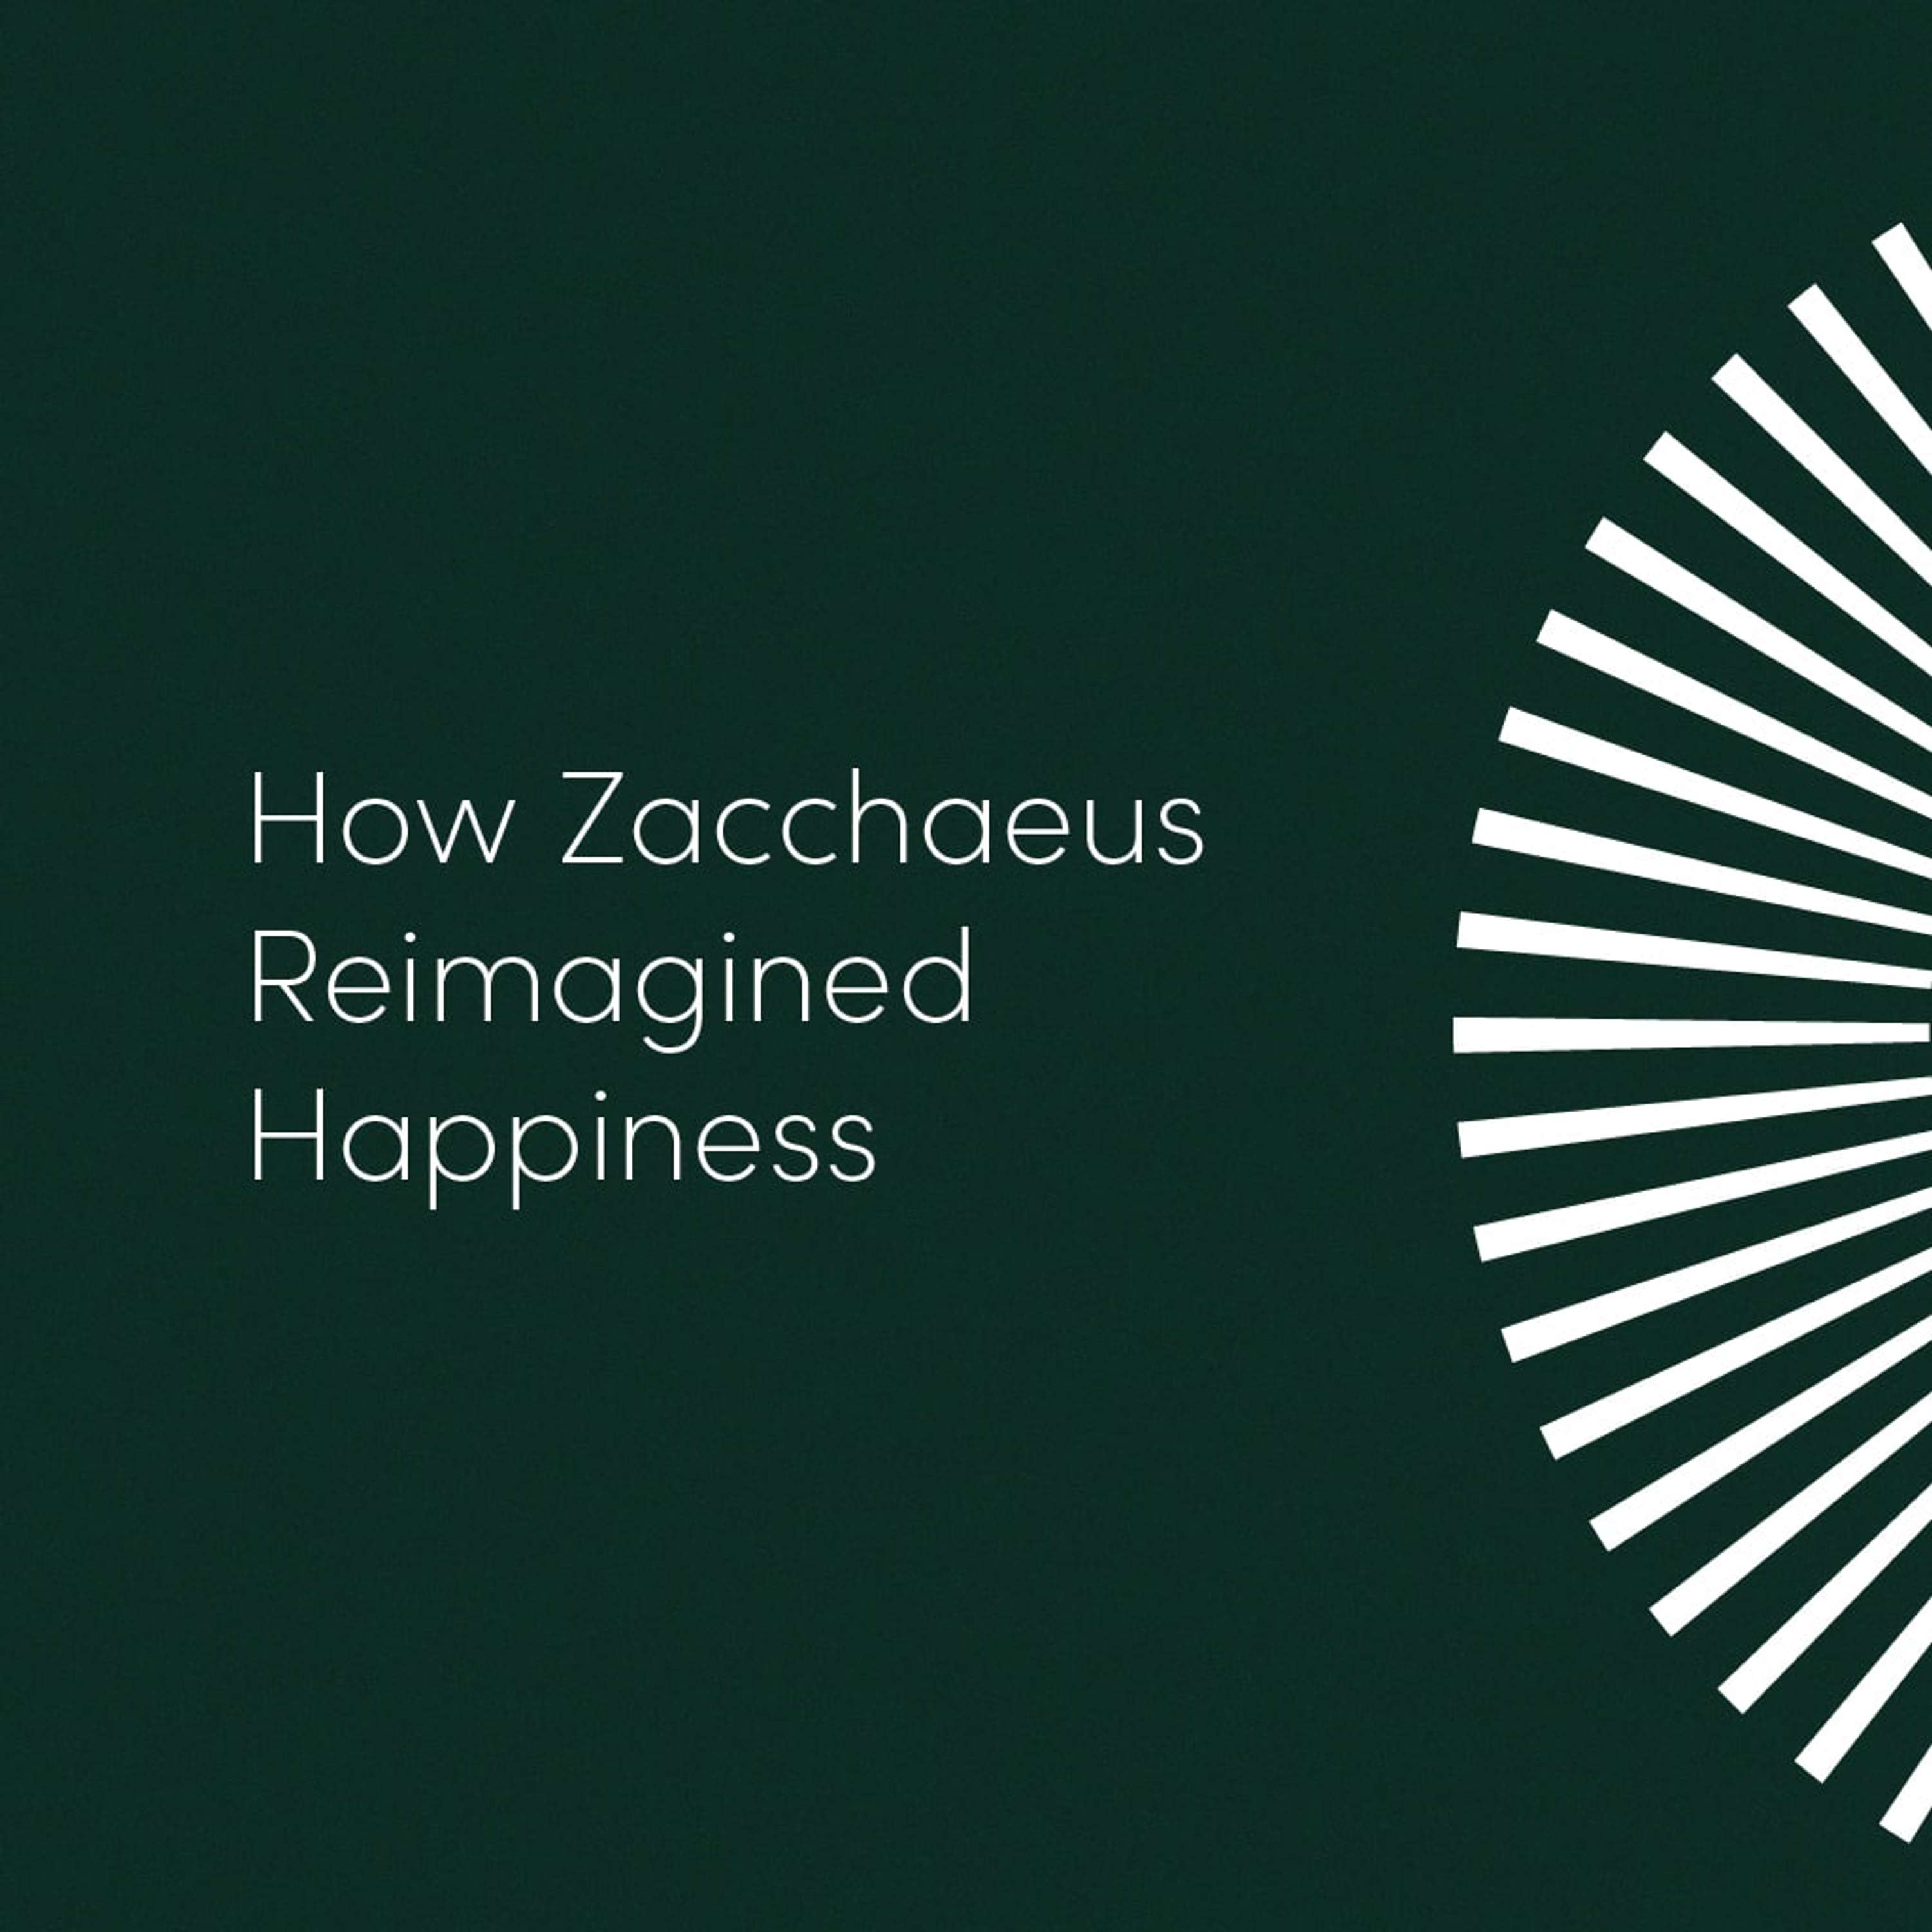 How Zacchaeus Reimagined Happiness | Pastor Mike Holwerda